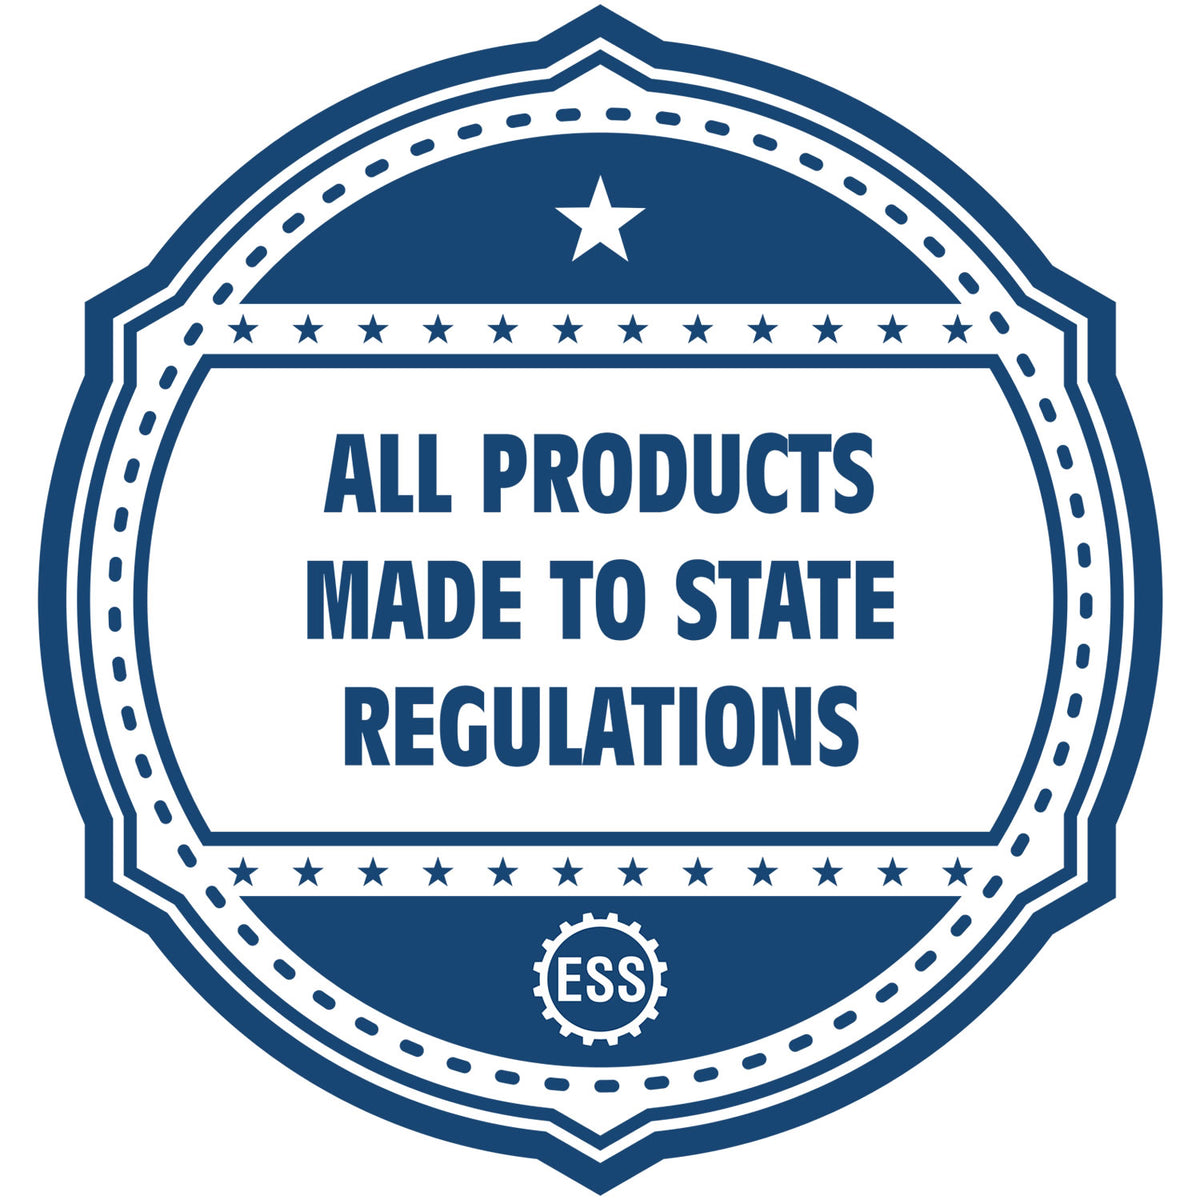 An icon or badge element for the Mississippi Desk Surveyor Seal Embosser showing that this product is made in compliance with state regulations.